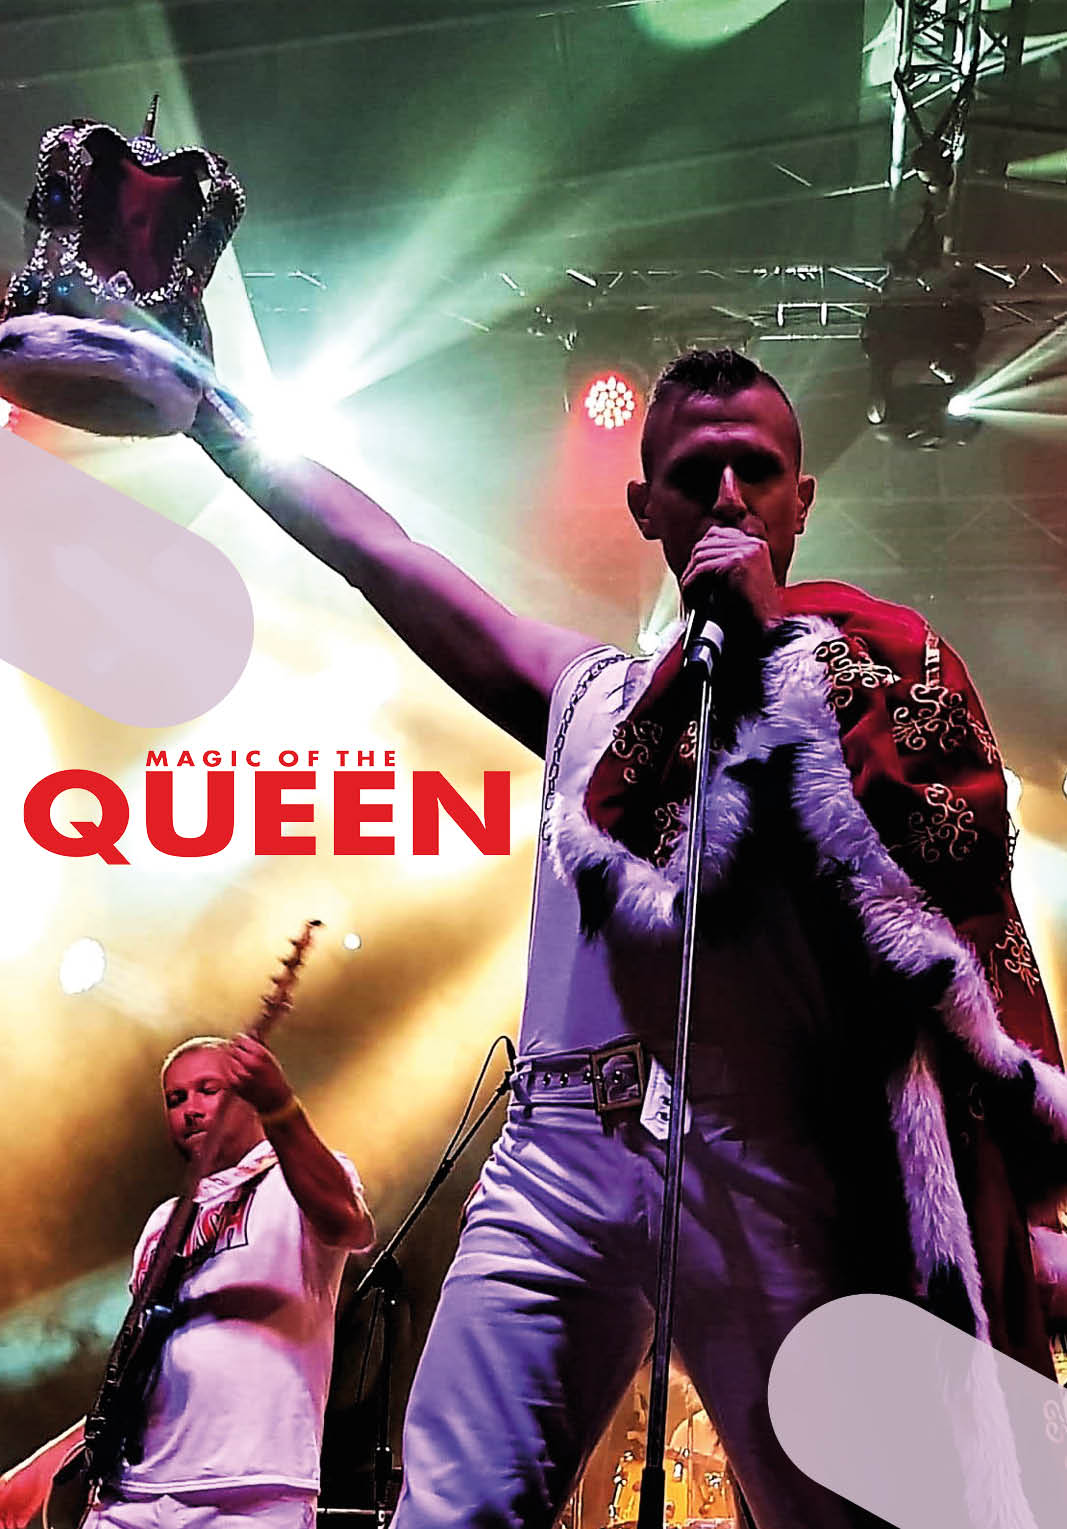 Magic of the Queen – live tribute show